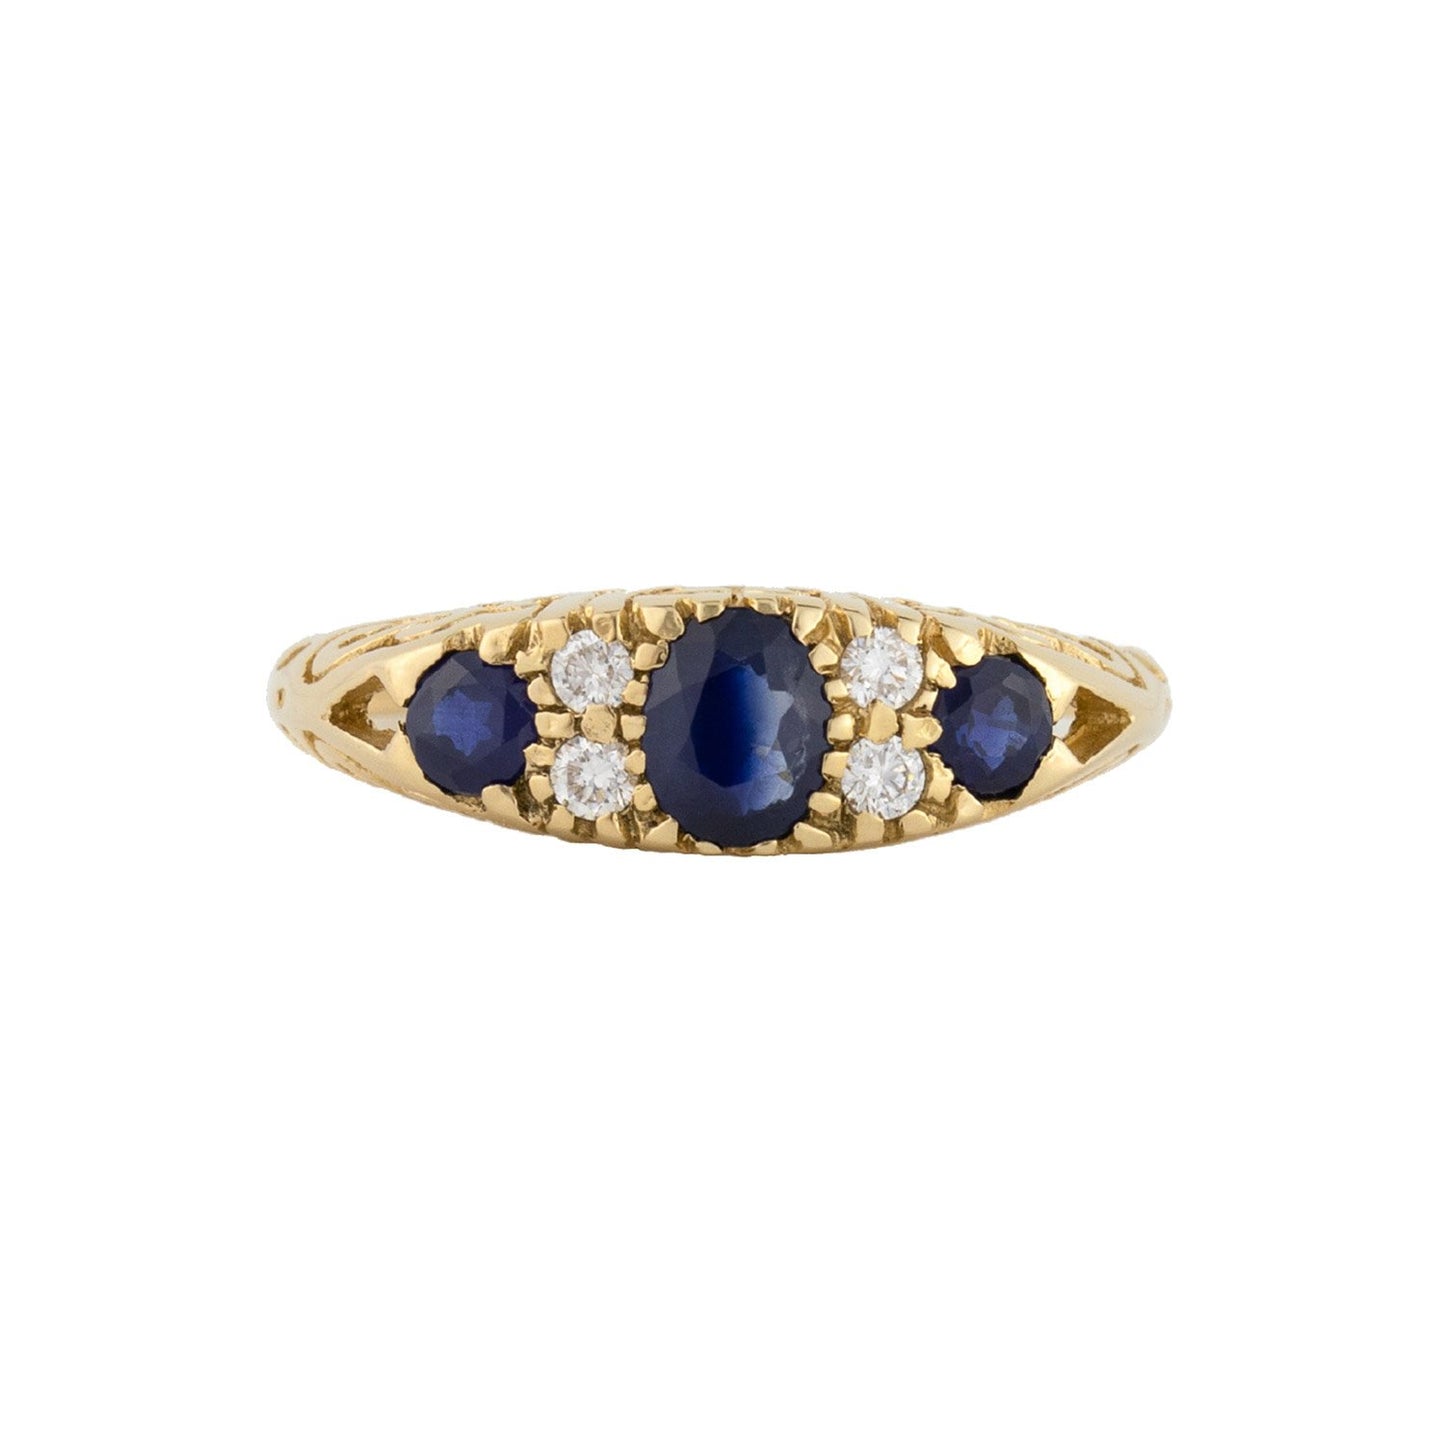 Matilda: Victorian Style Half Hoop Ring in 9ct Yellow Gold, Sapphire and Diamond